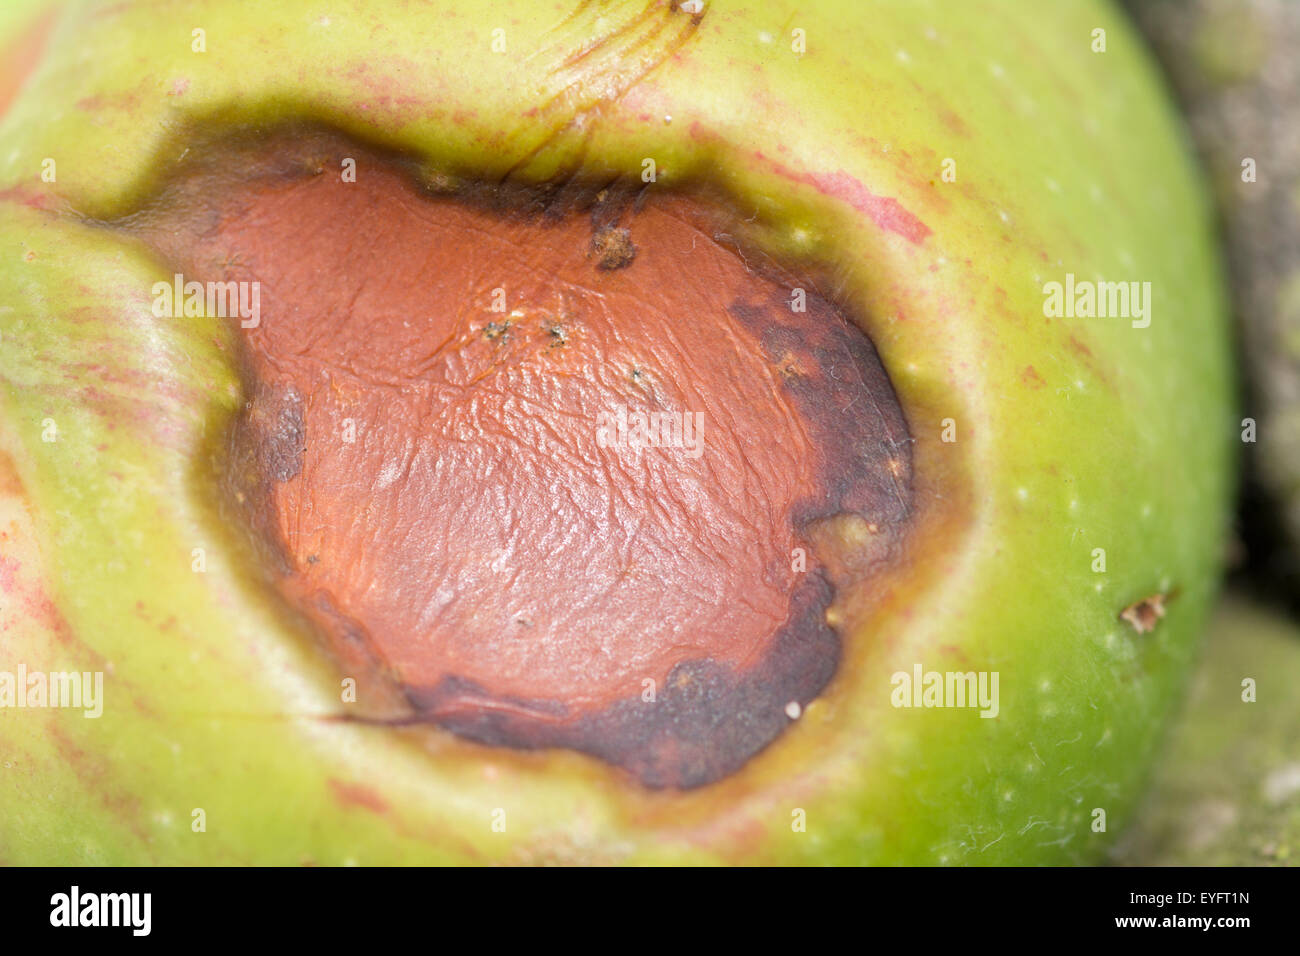 Damage to the skin of a cooking apple Stock Photo